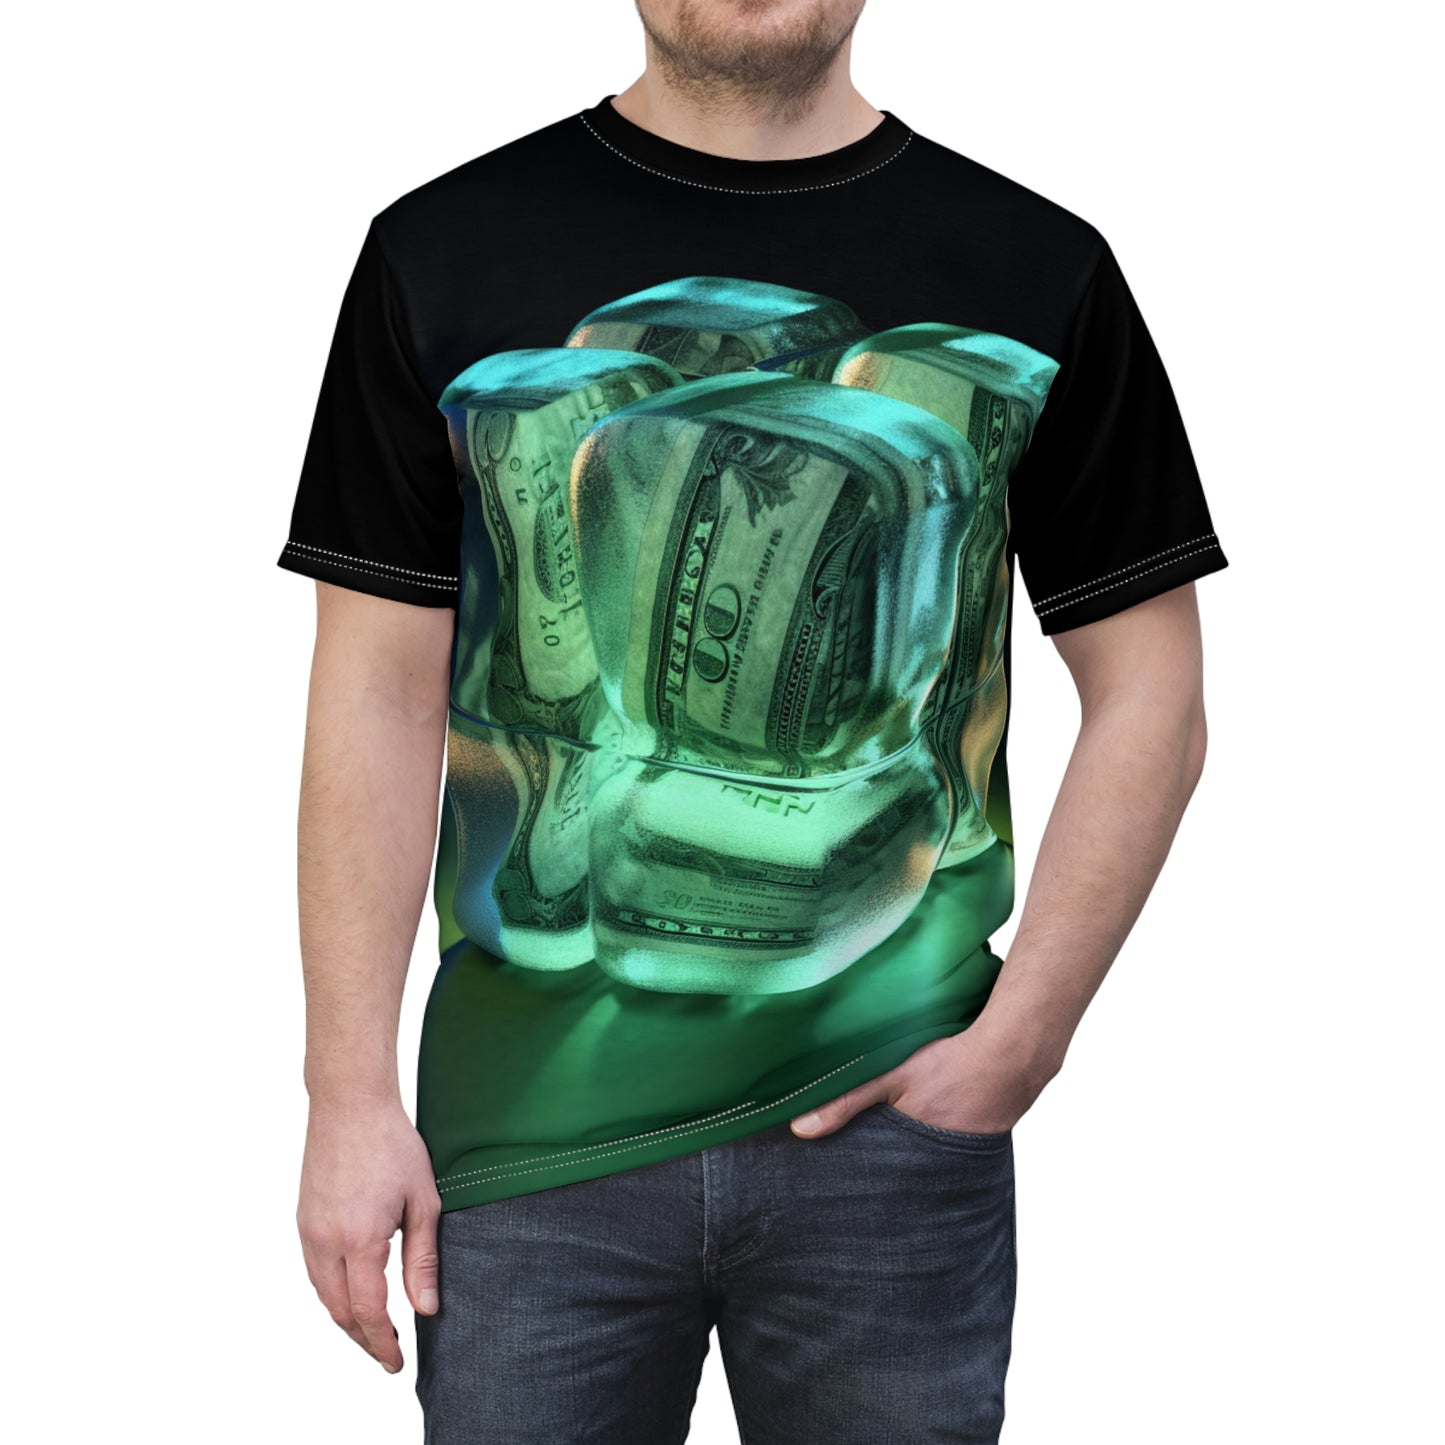 "Ice Cold Money" Graphic T-Shirt